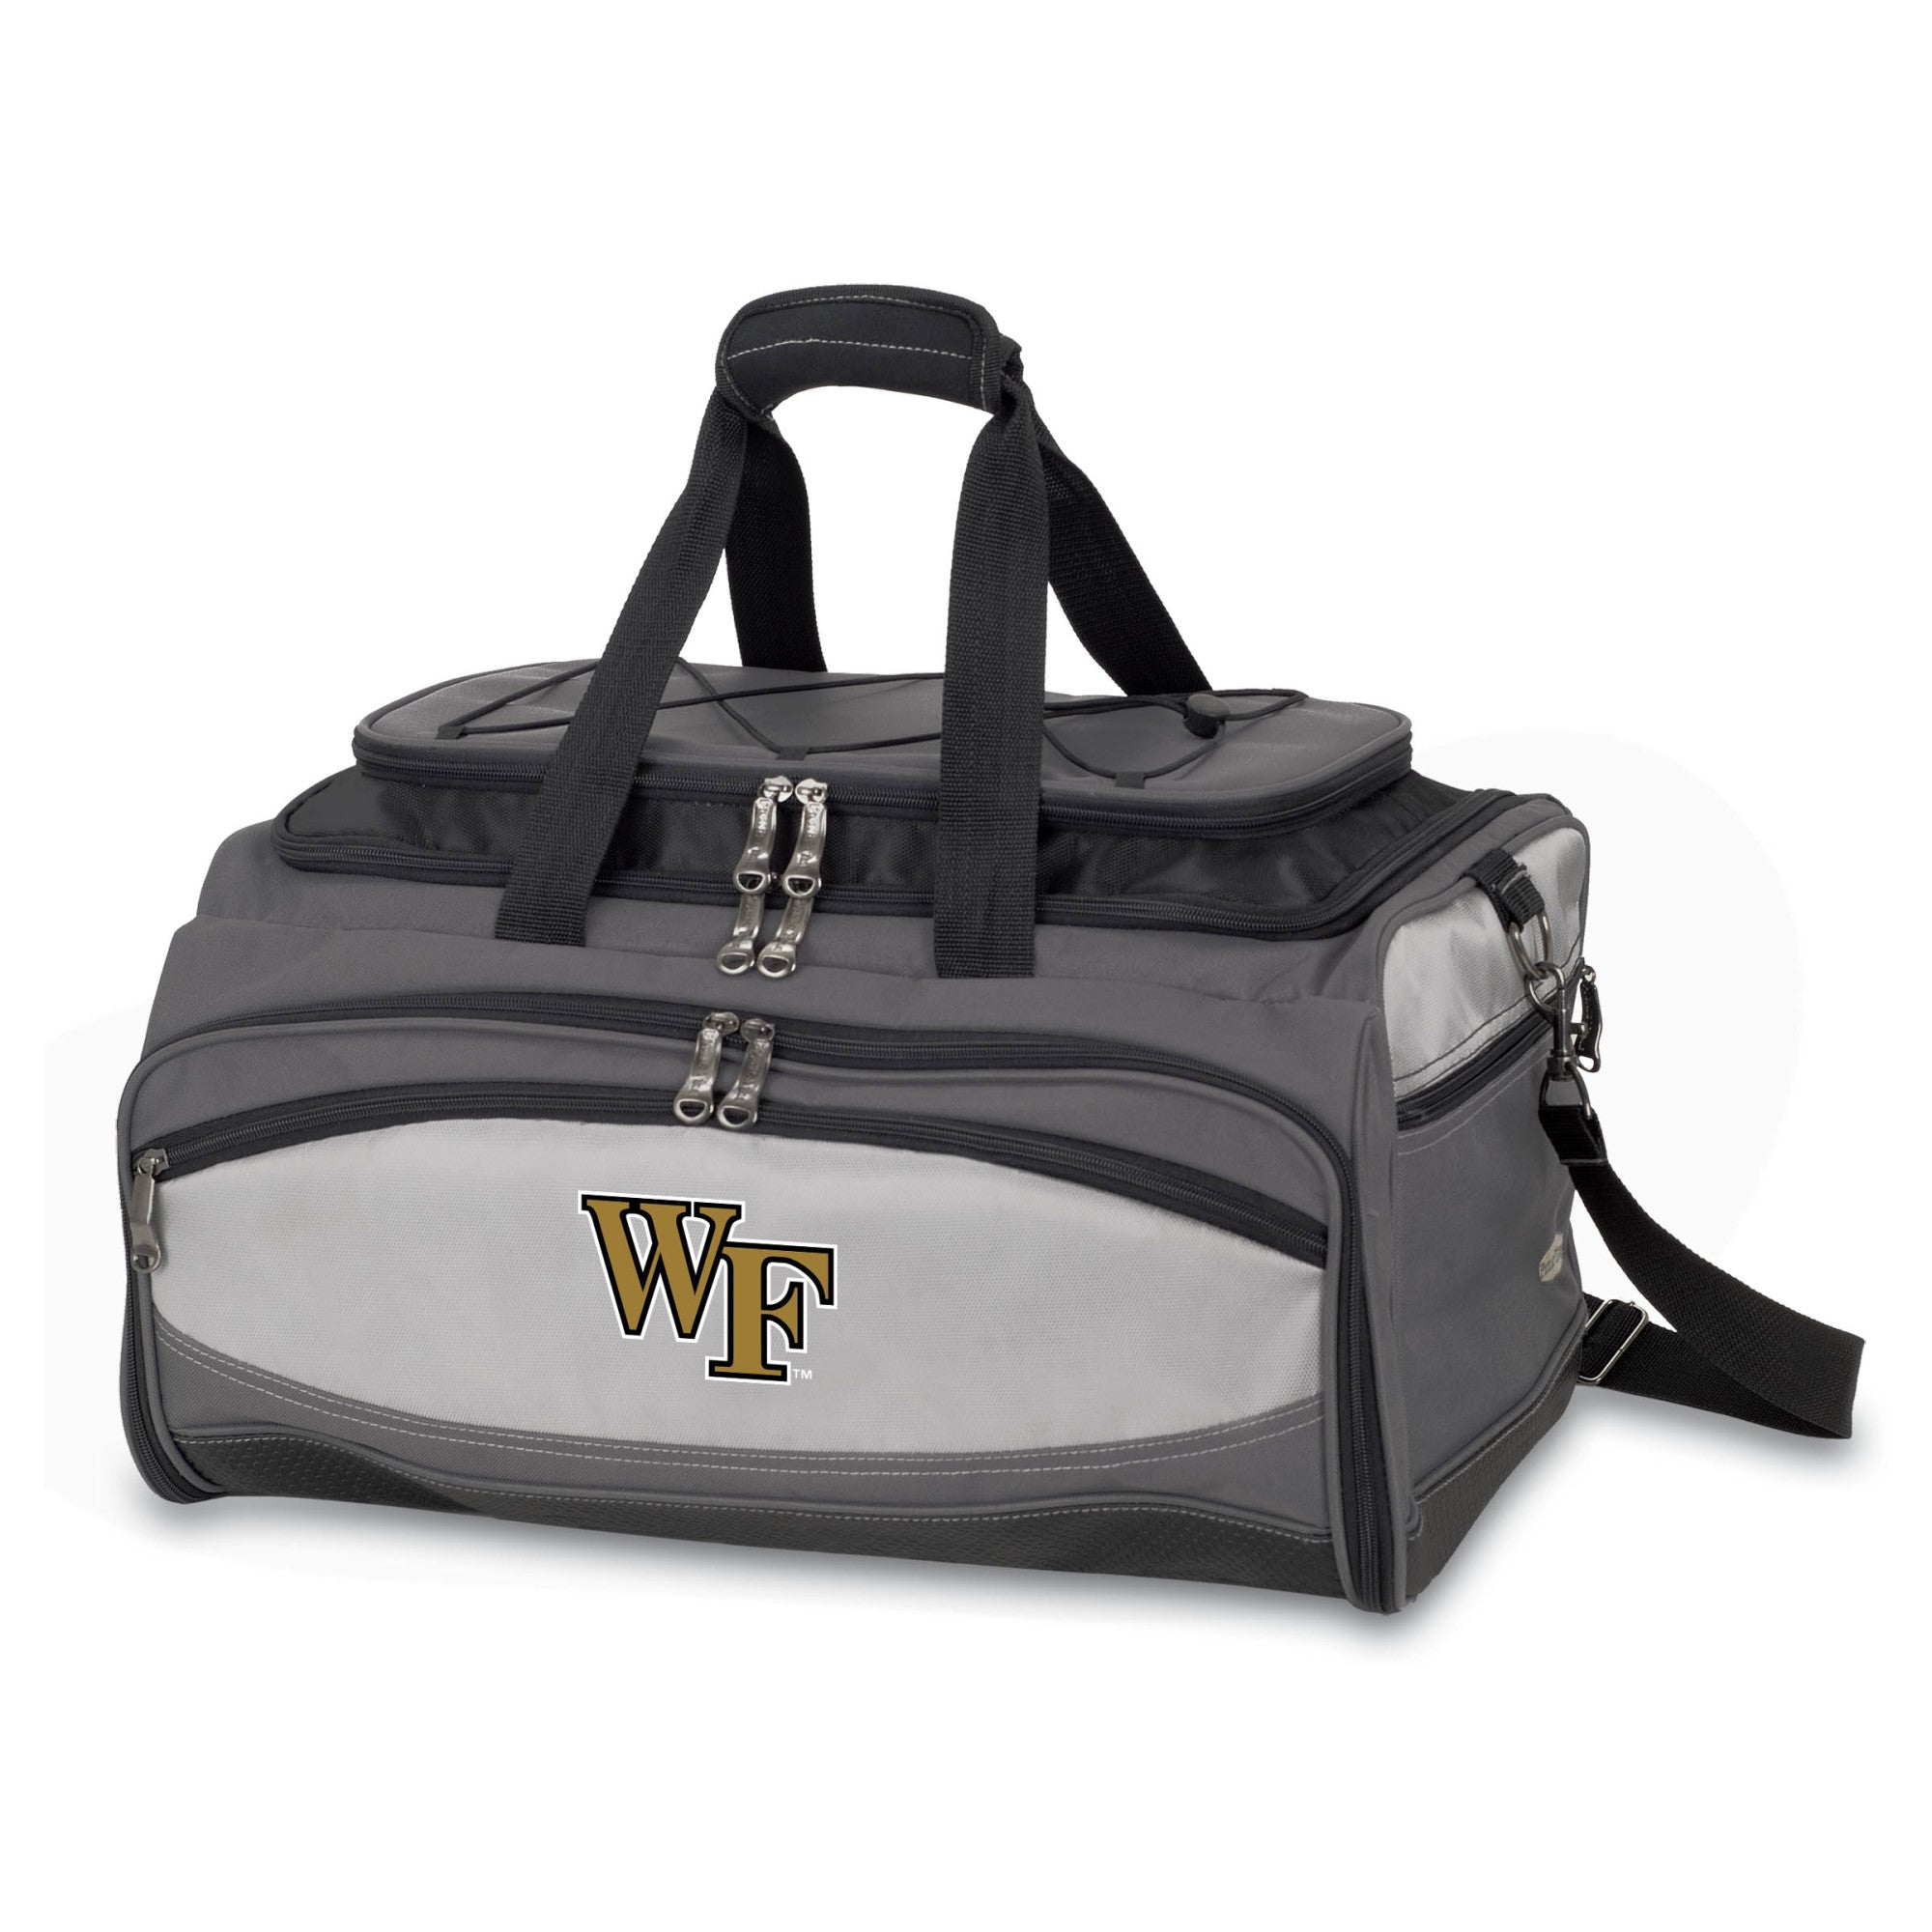 Wake Forest Demon Deacons - Buccaneer Portable Charcoal Grill & Cooler Tote, (Black with Gray Accents)